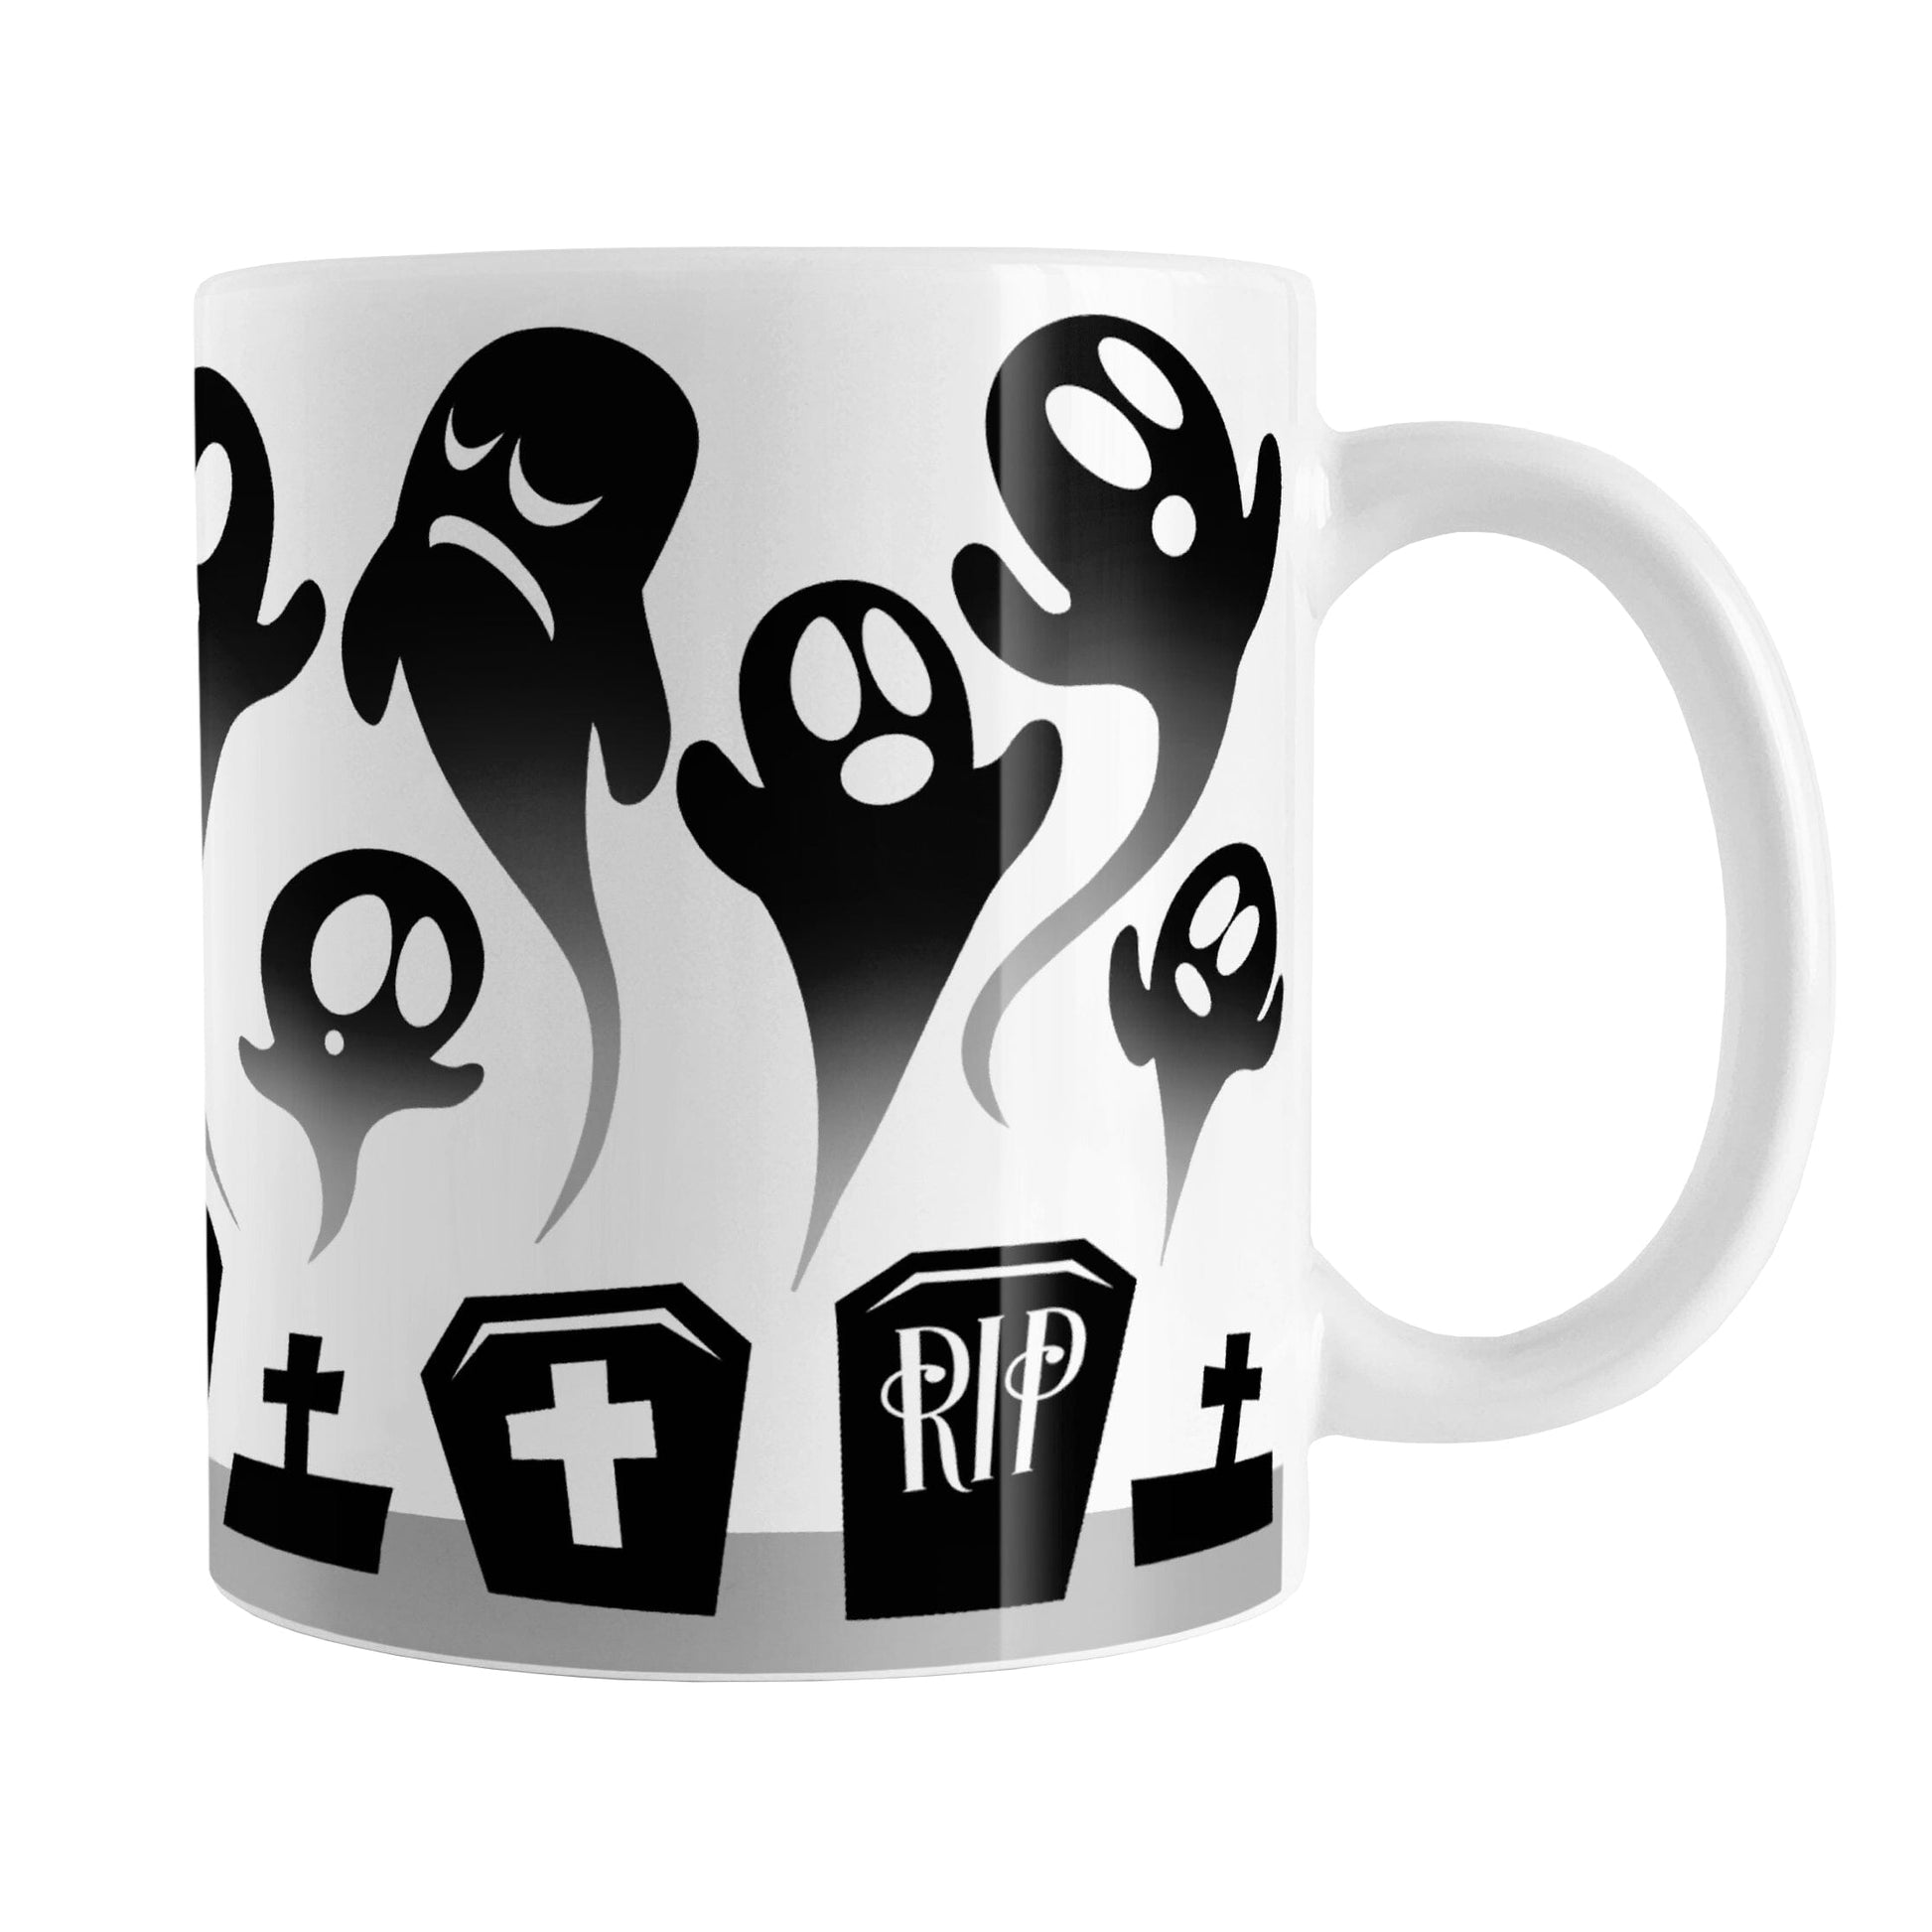 Rising Ghosts Halloween Mug (11oz) at Amy's Coffee Mugs.A ceramic coffee mug featuring whimsical ghosts rising above cemetery gravestones in a black and white design that wraps around the mug up to the handle. 